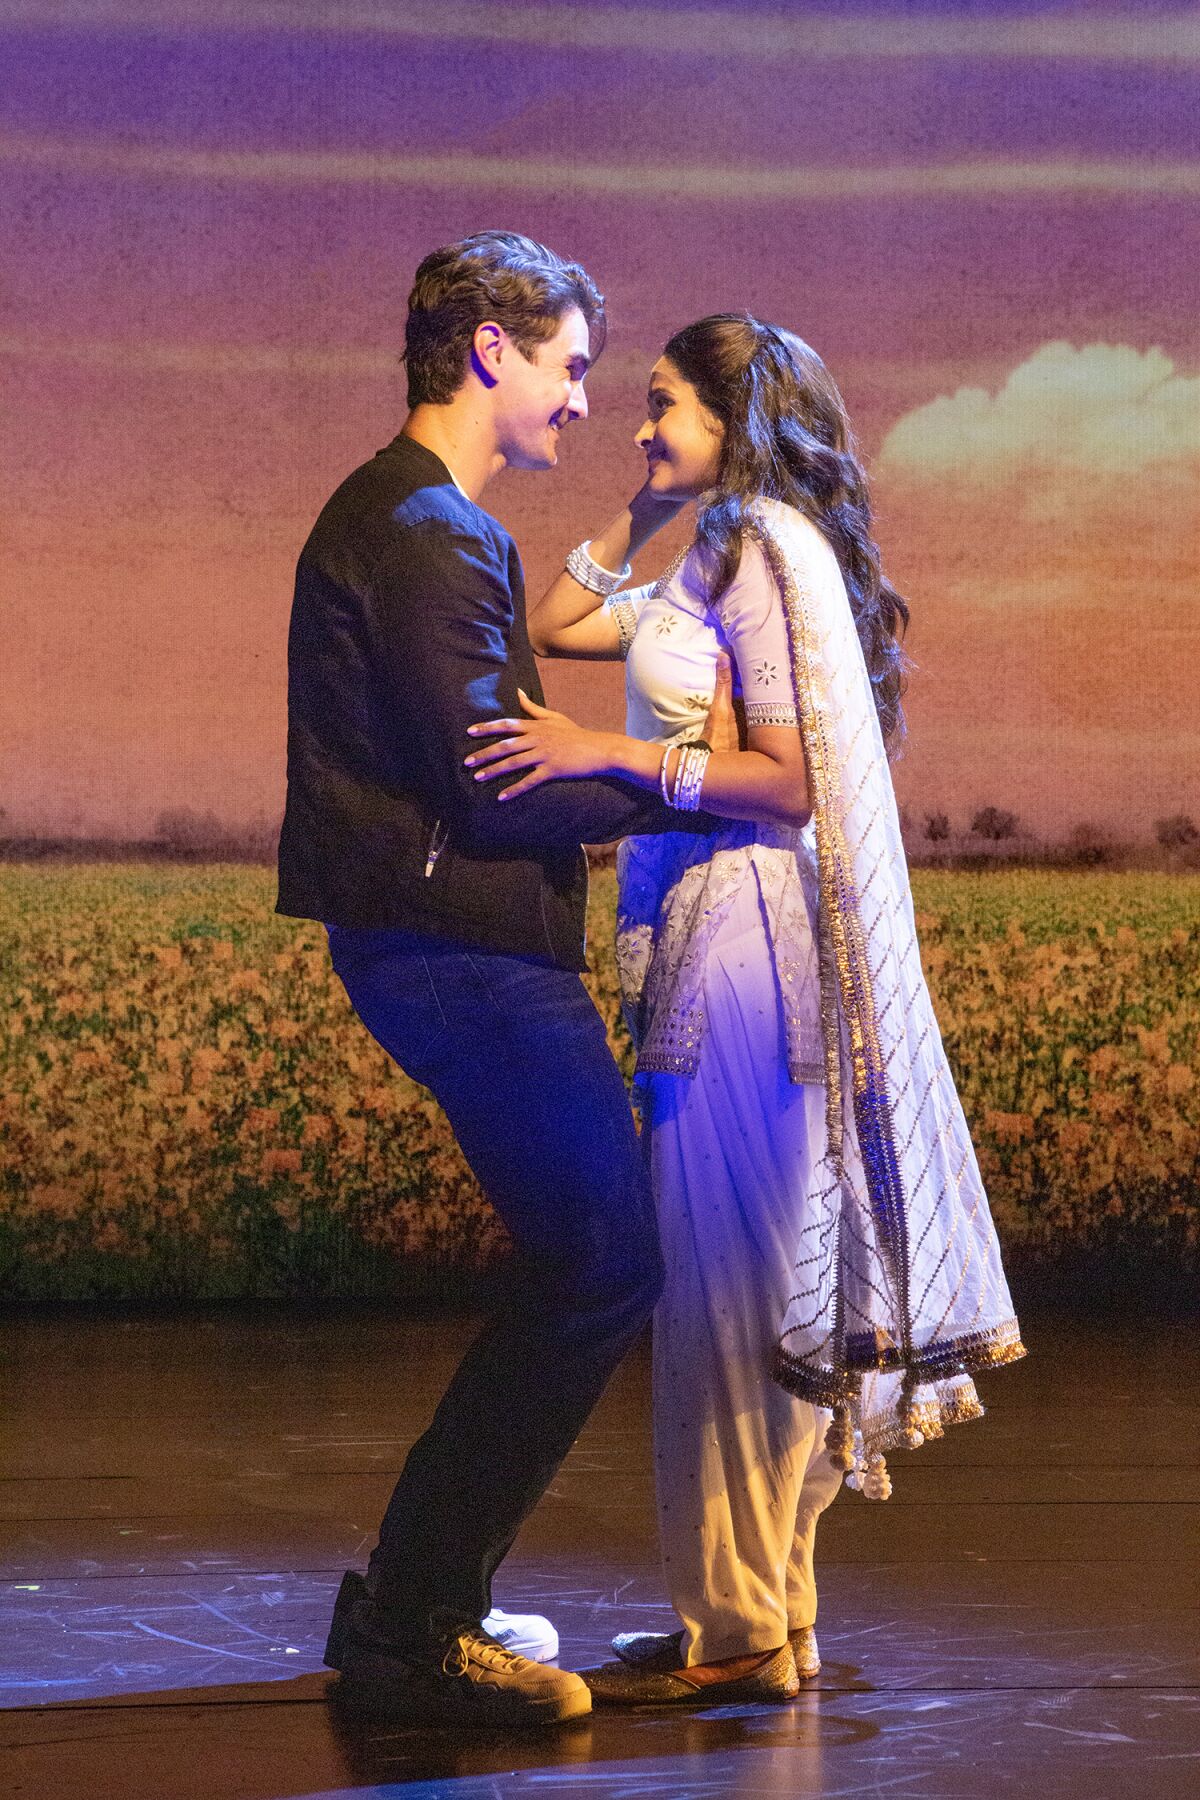 Austin Colby as Roger and Shoba Narayan as Simran in "Come Fall in Love – The DDLJ Musical" at the Old Globe.